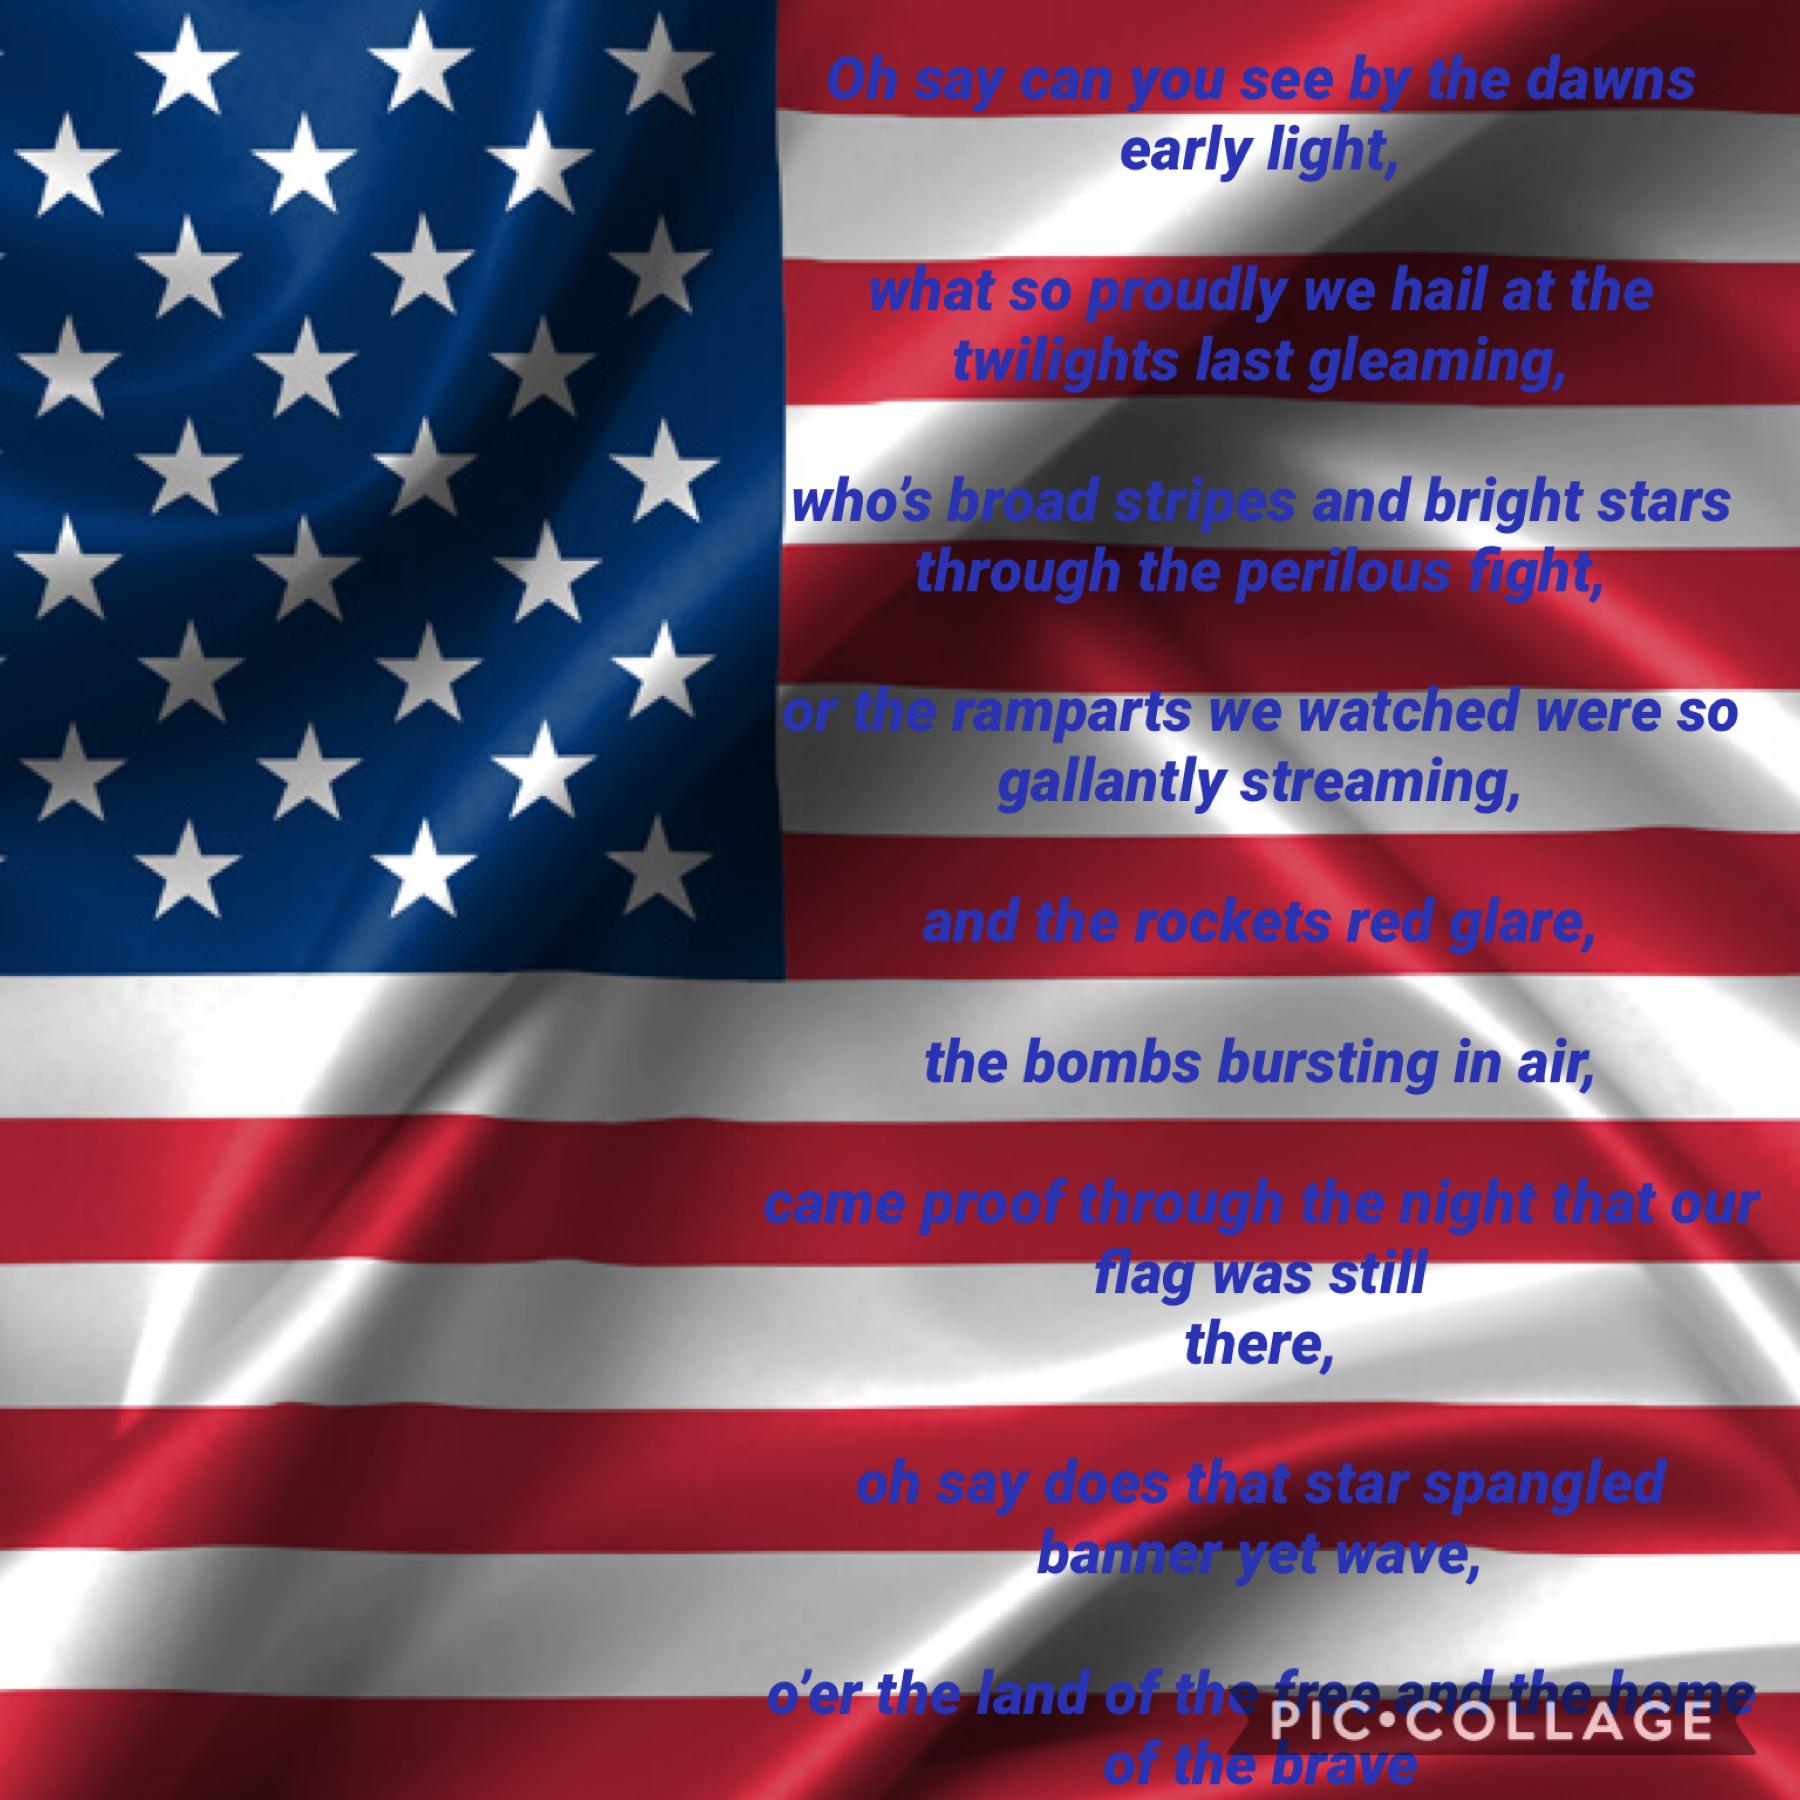 Post a video of you singing the star spangled banner in honor of our veterans